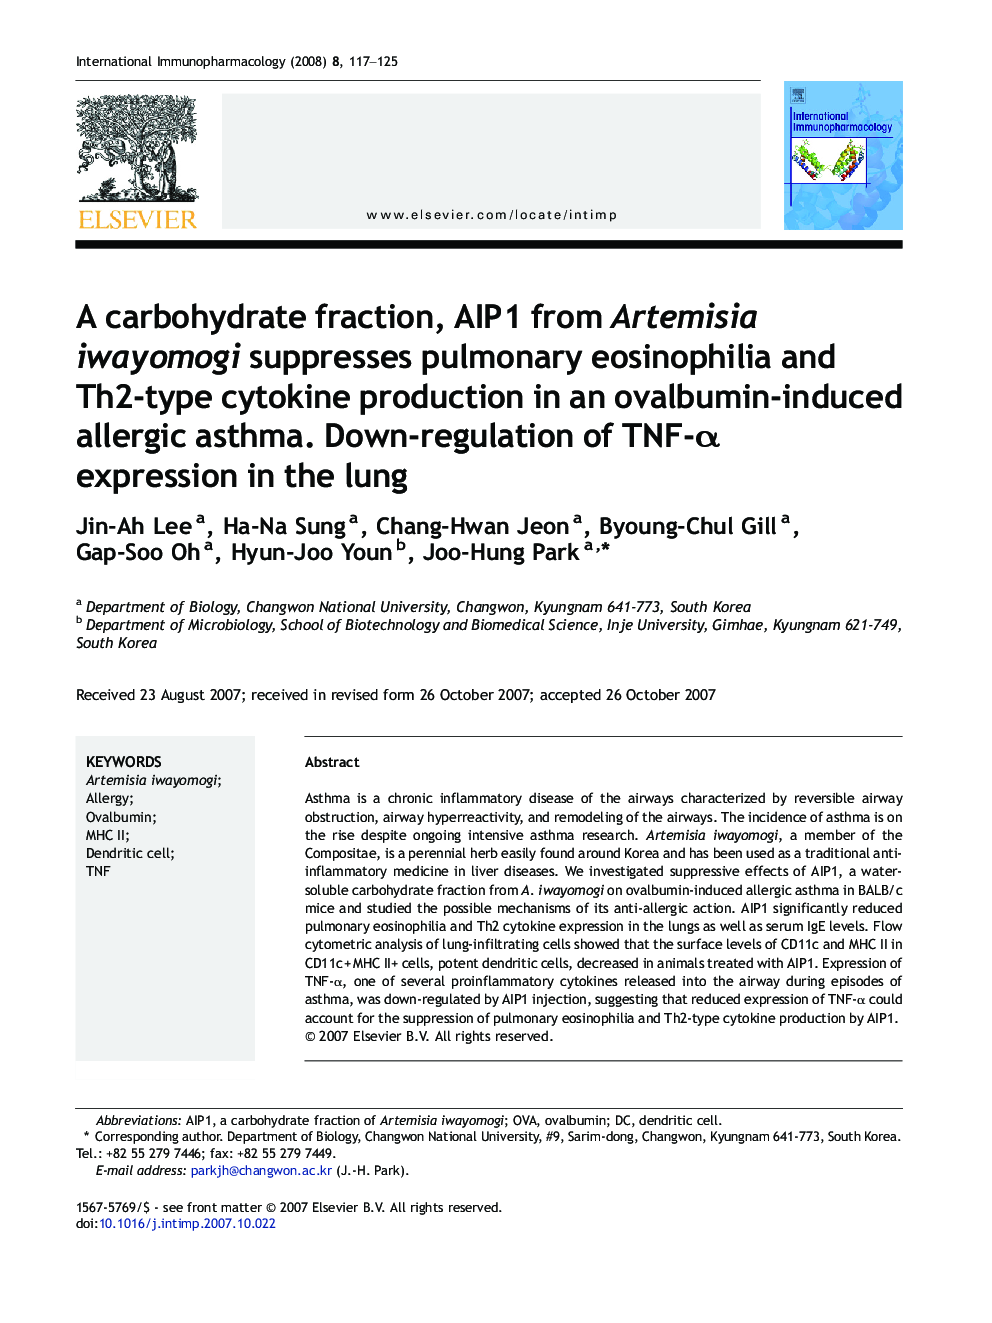 A carbohydrate fraction, AIP1 from Artemisia iwayomogi suppresses pulmonary eosinophilia and Th2-type cytokine production in an ovalbumin-induced allergic asthma. Down-regulation of TNF-α expression in the lung